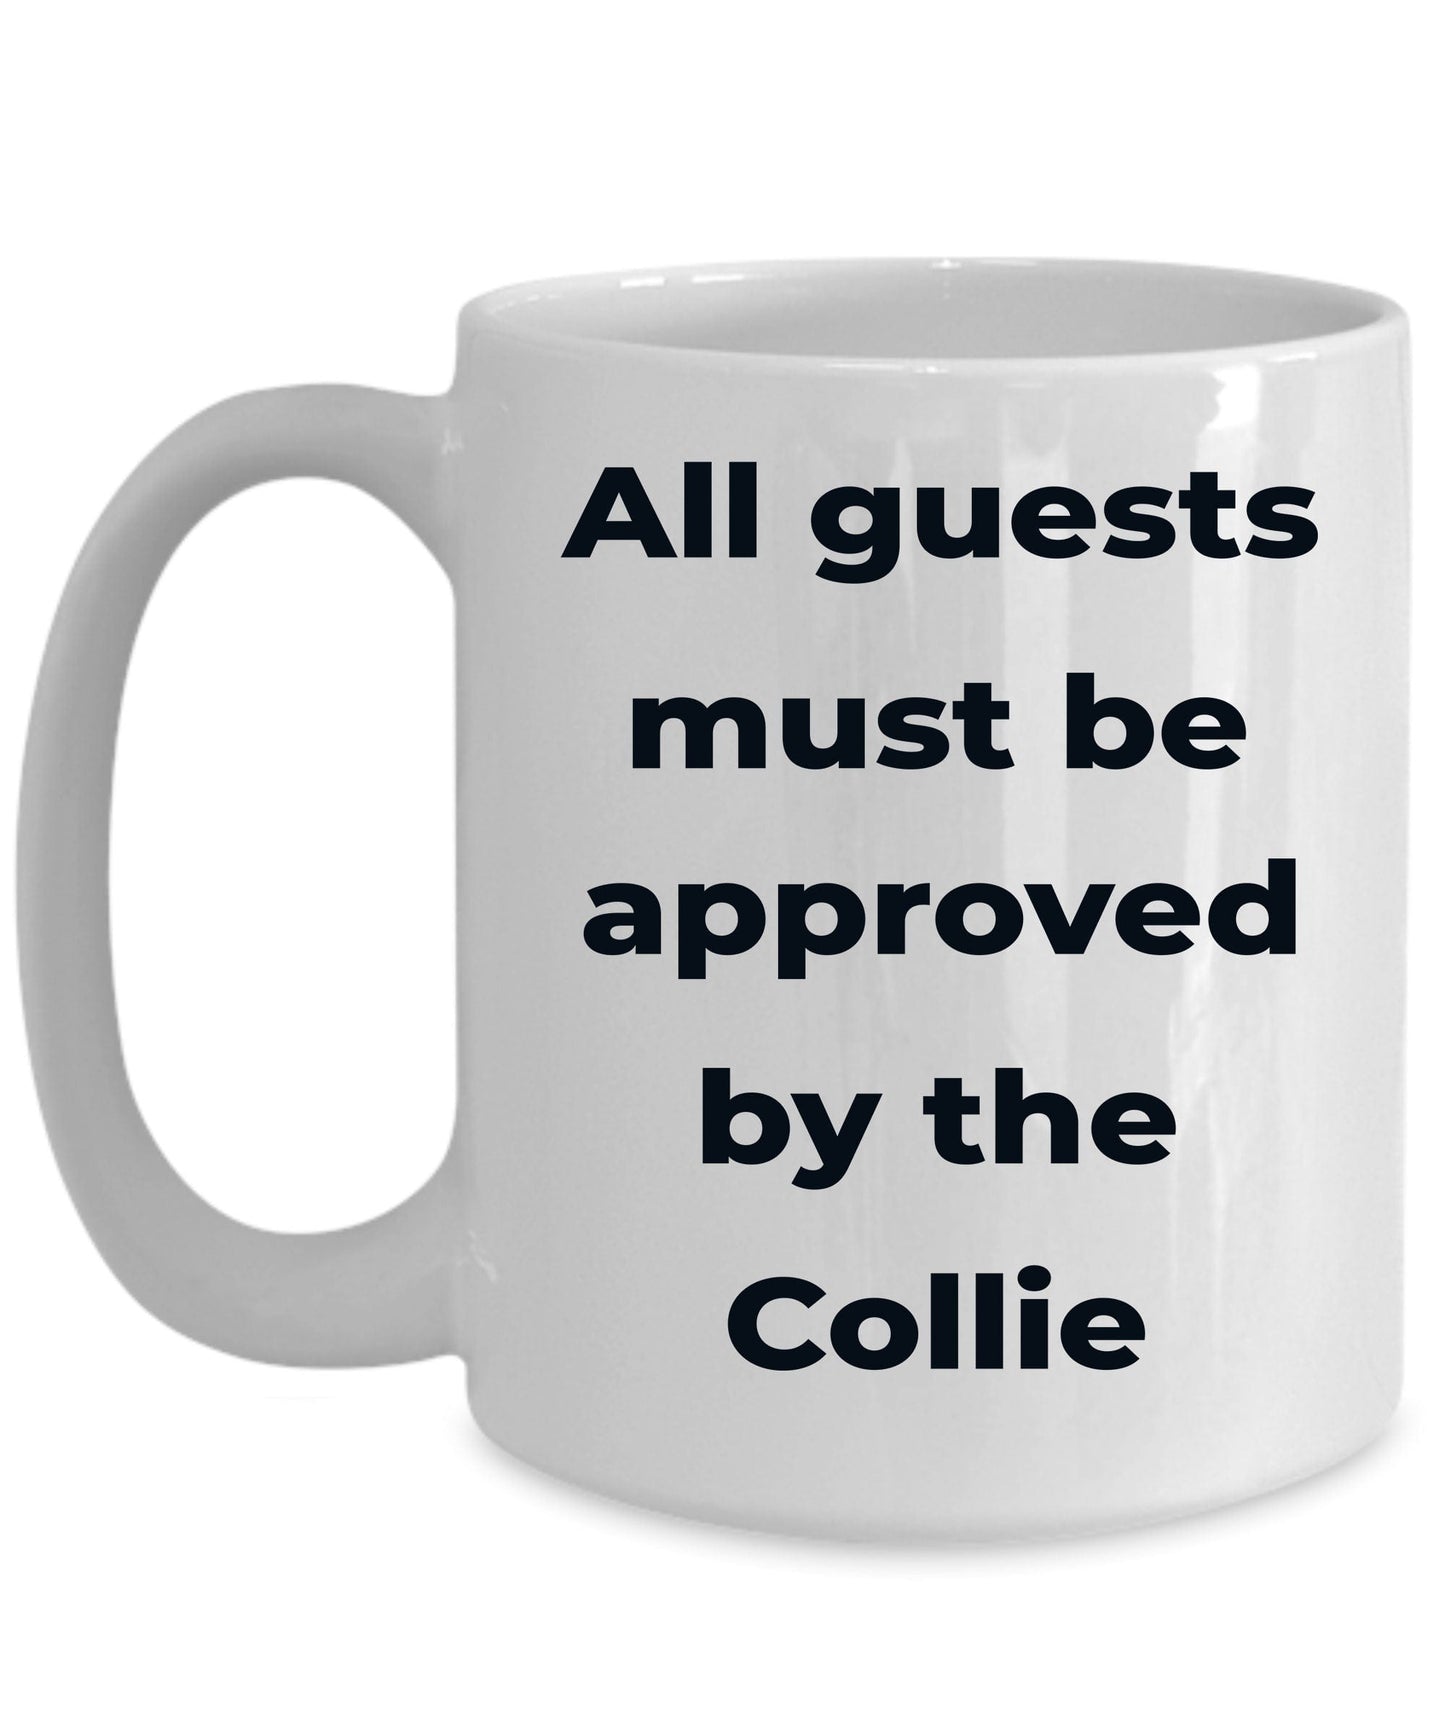 Rough Collie Coffee Mug - All guests must be approved by the Collie